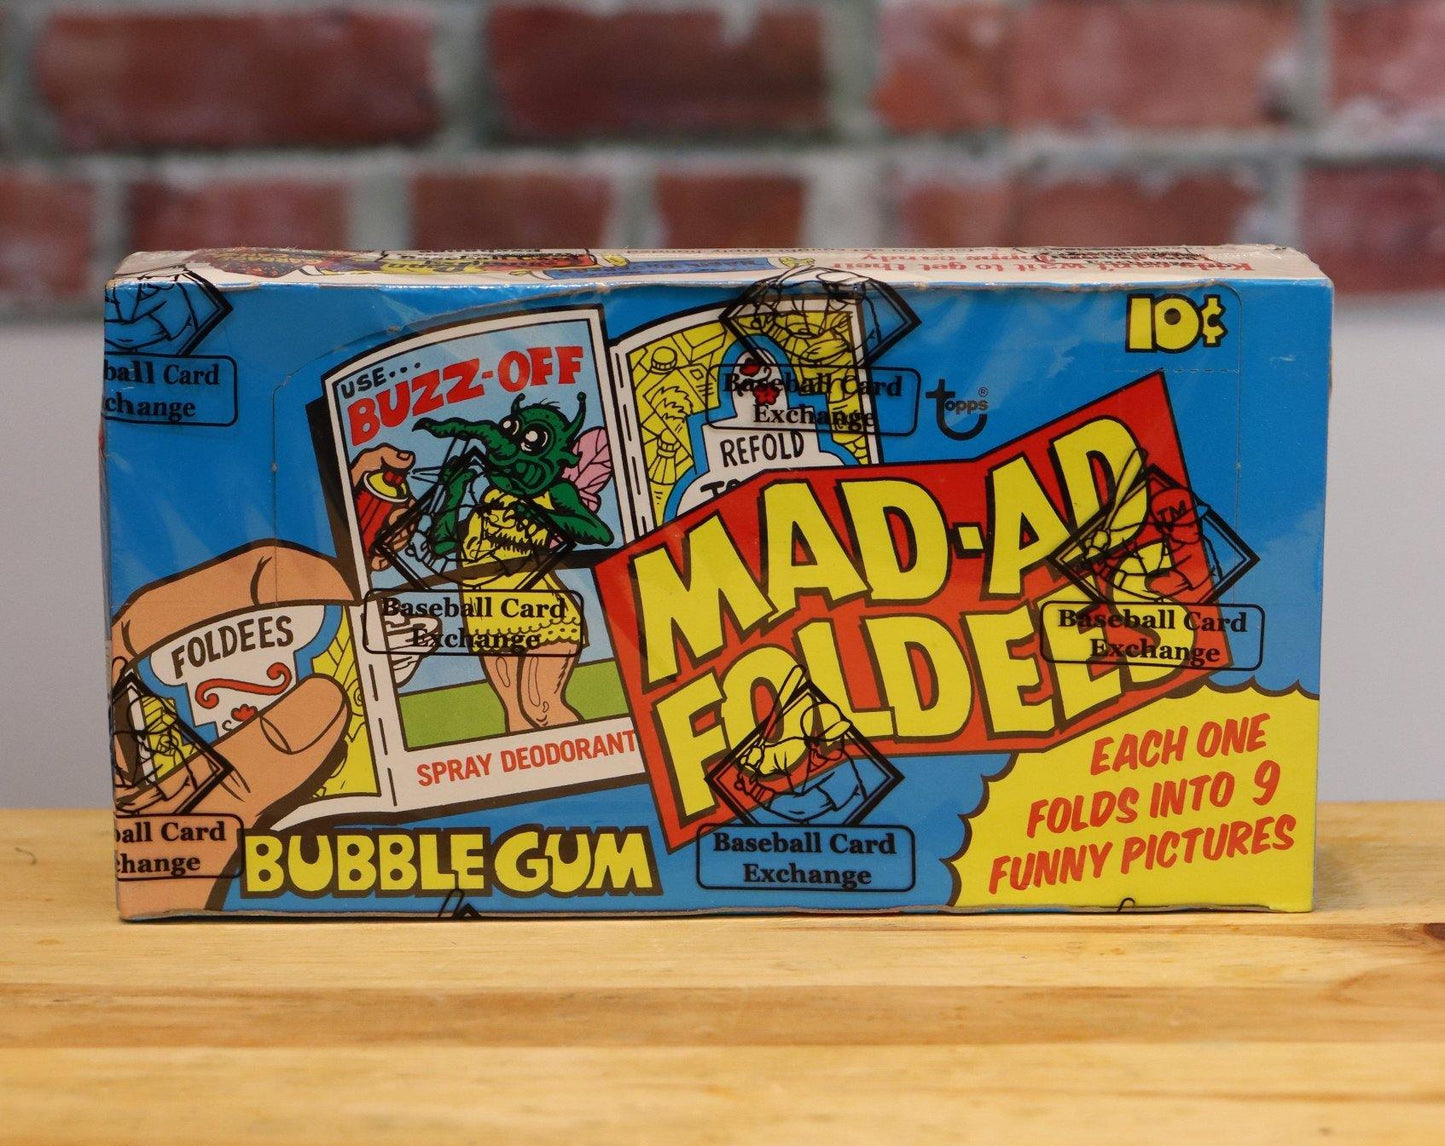 1976 Topps Mad Ad Foldees Trading Cards Wax Box (36 Packs) BBCE Authenticated - FLIP Collectibles Shop